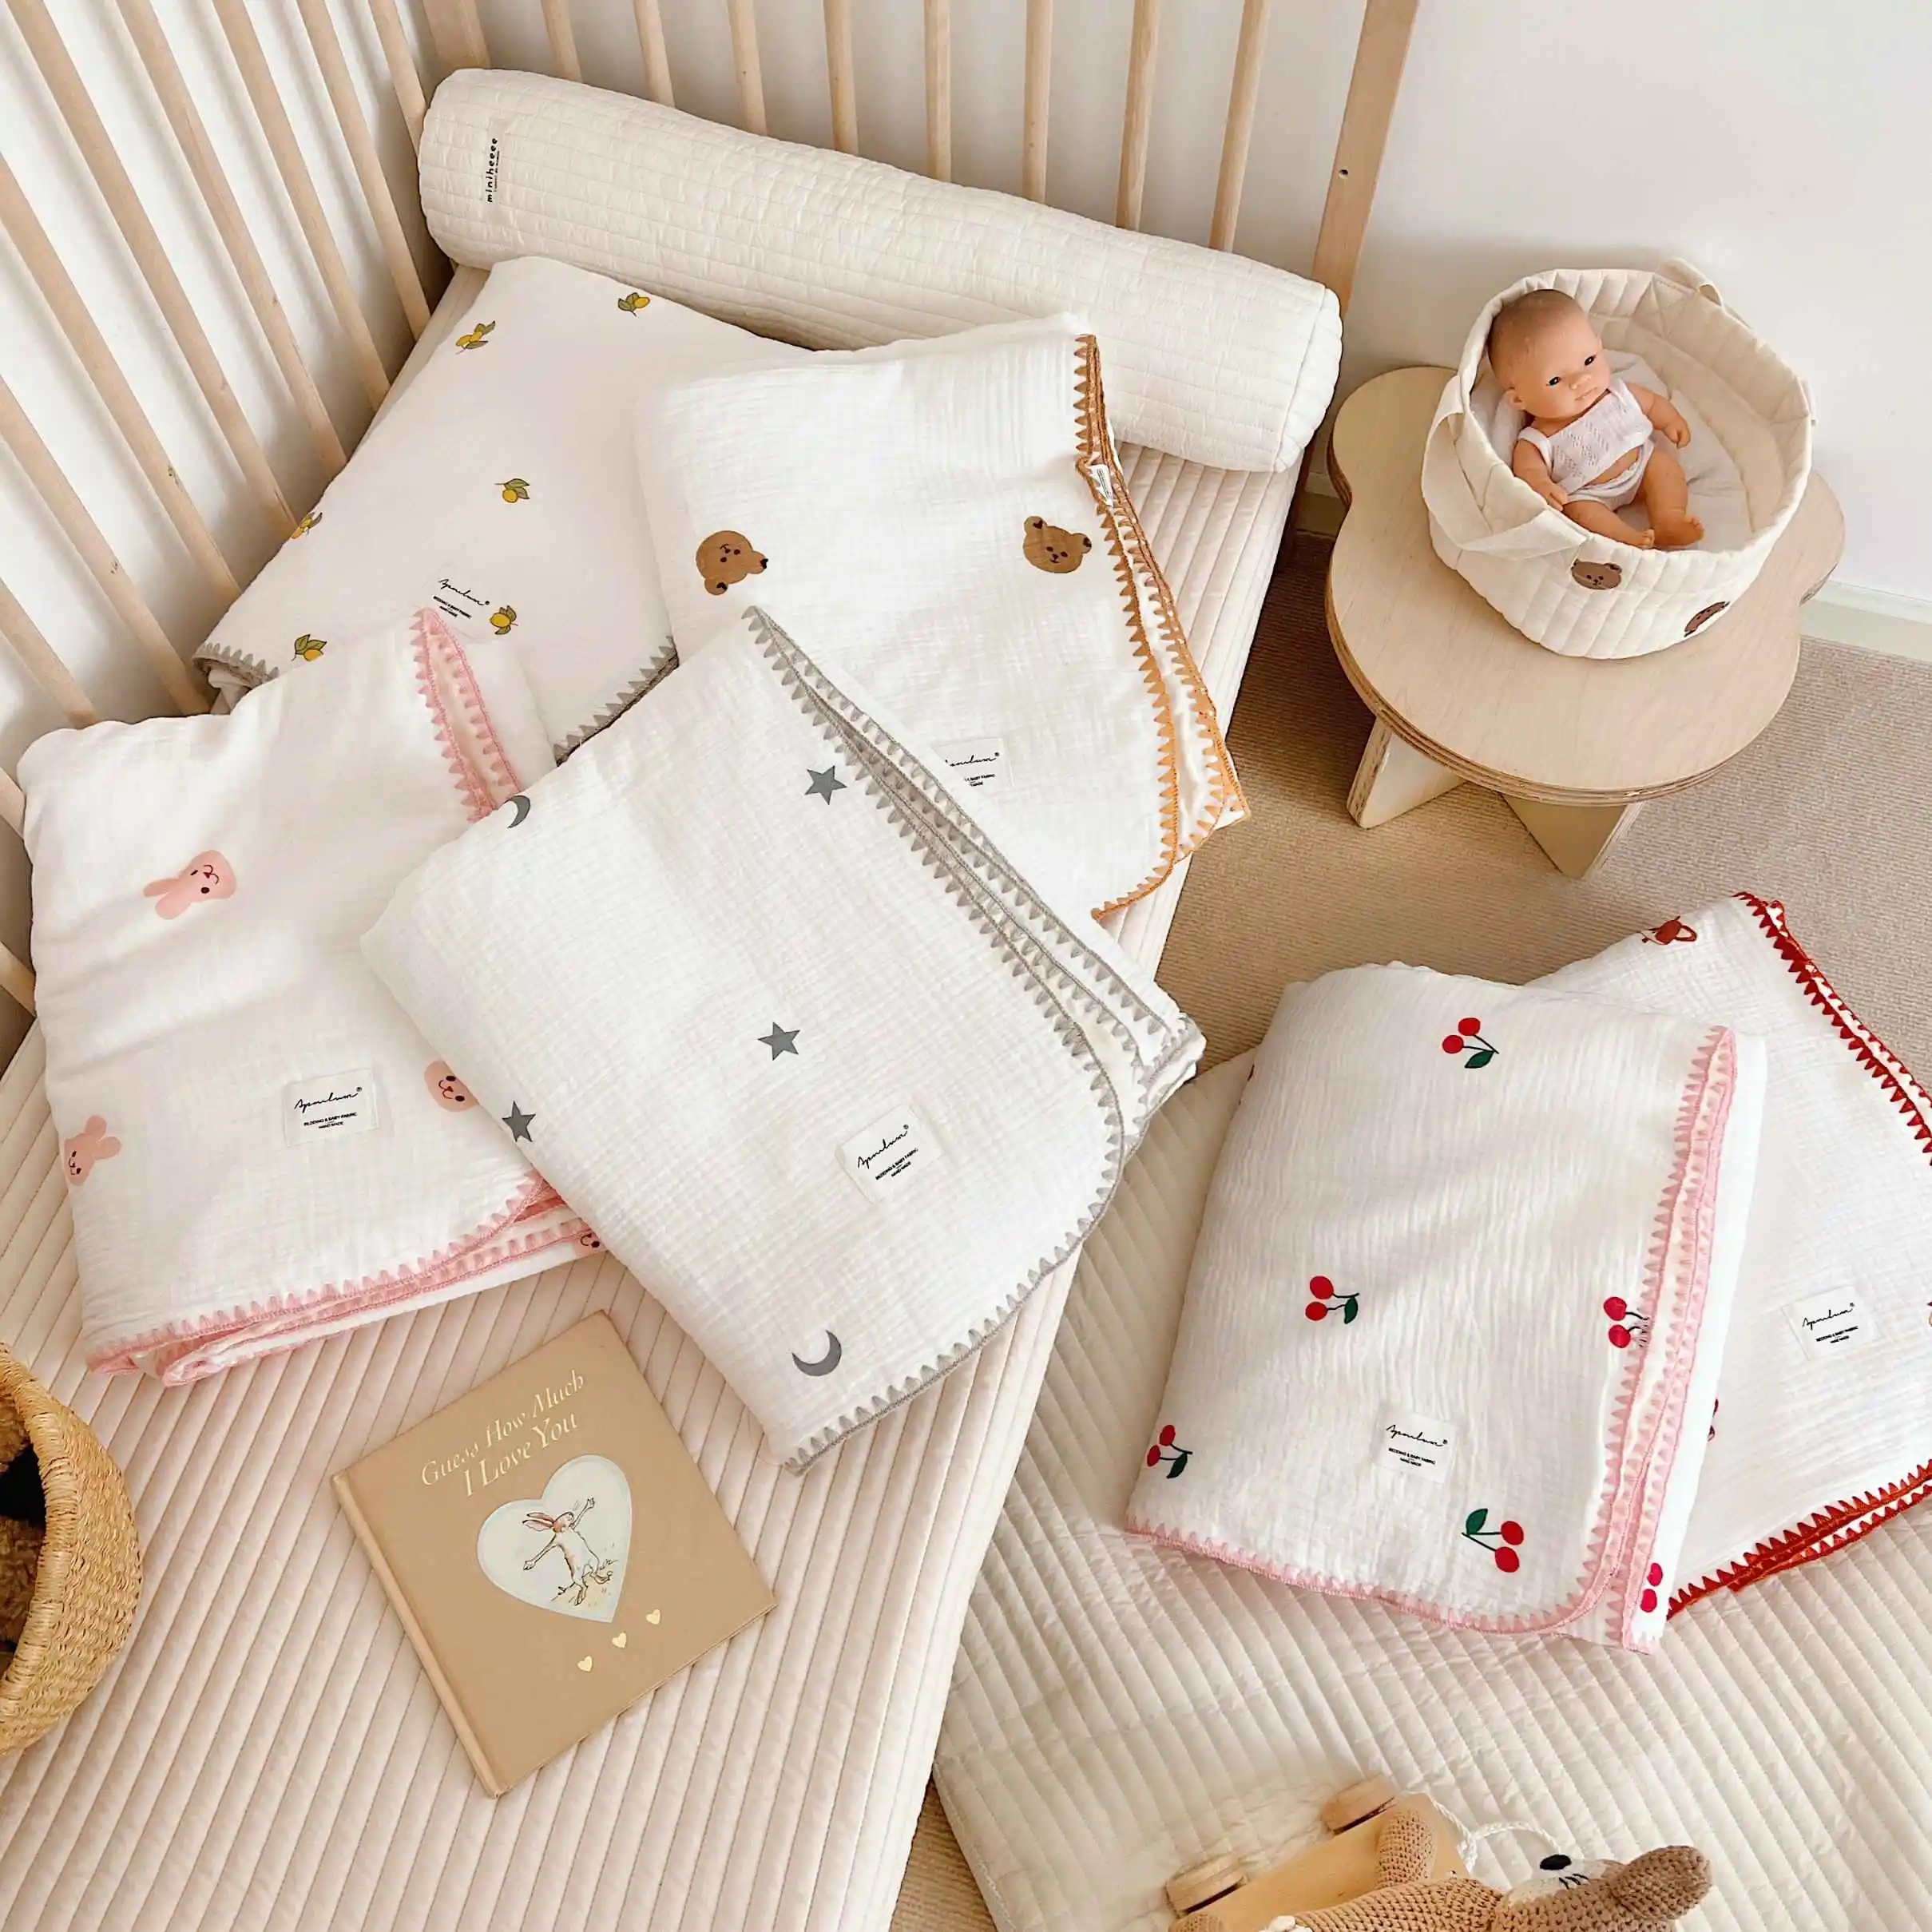 

Minky Baby Blanket Silky Soft Dot Fleece Newborn Blanket with Dotted Backing Toddler Bear Bunny Print Cotton Muslin Quilt